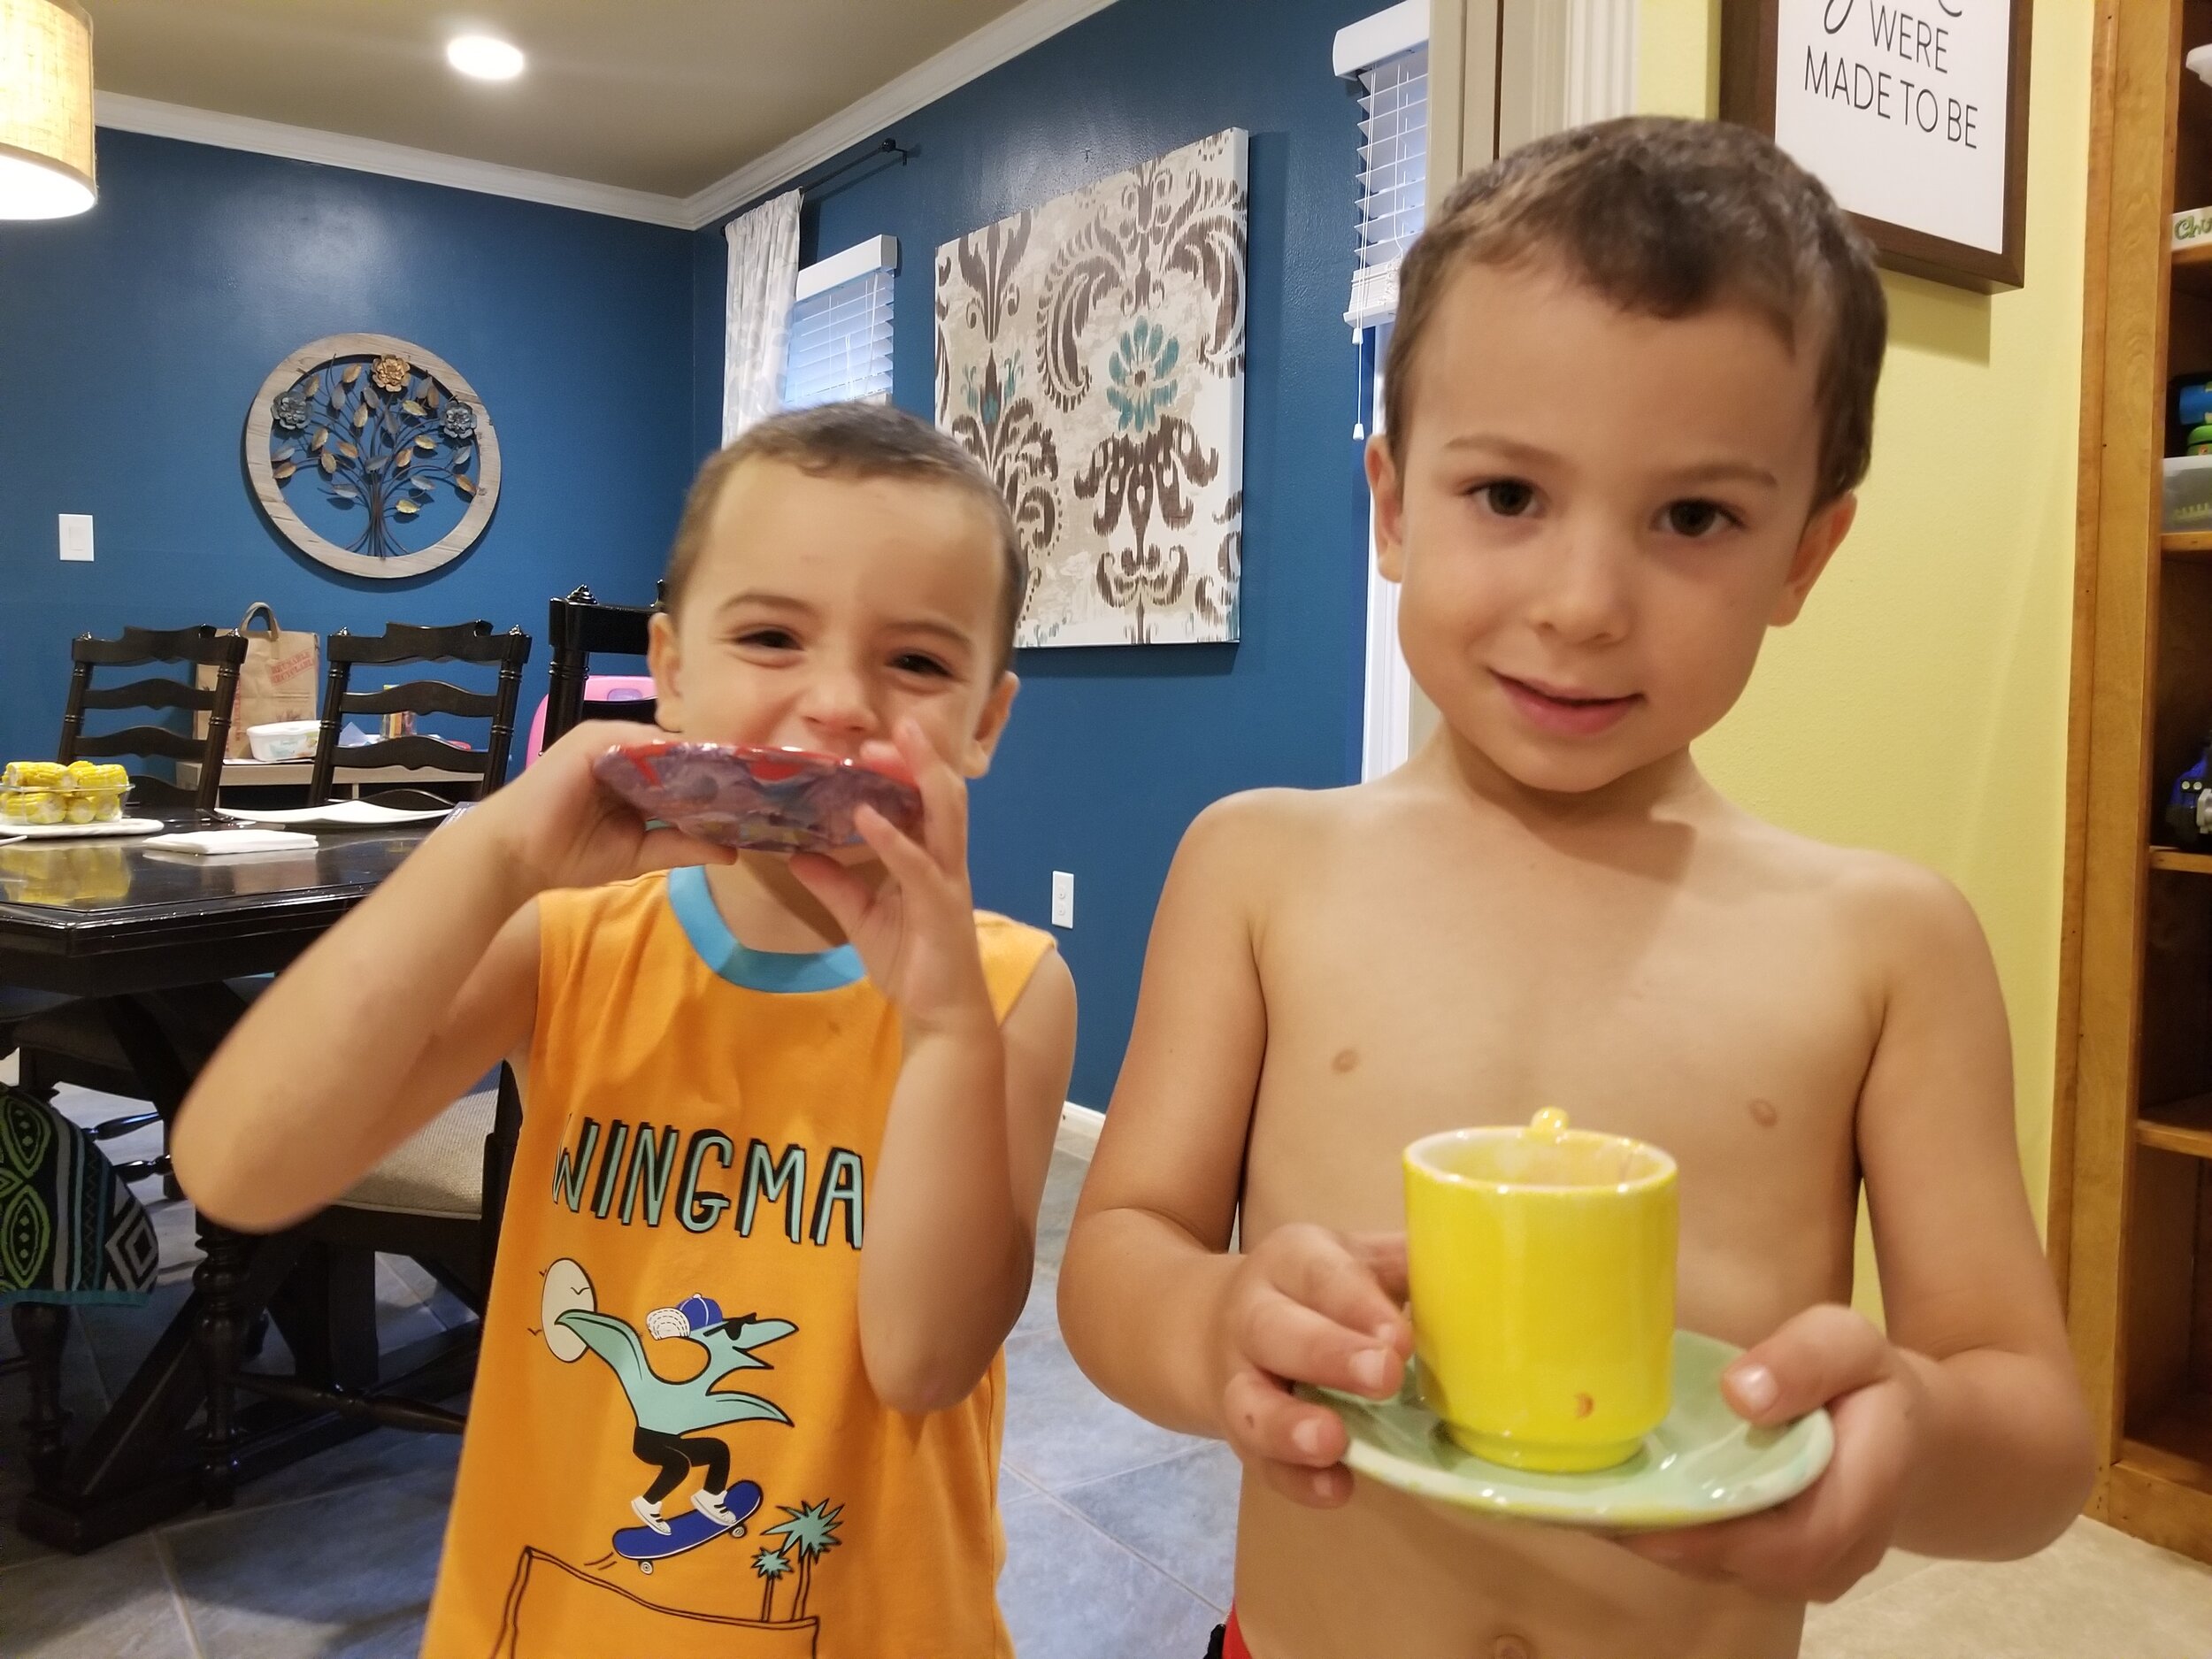  Paint Your Own Pottery at Home on Hello Rascal Kids. 